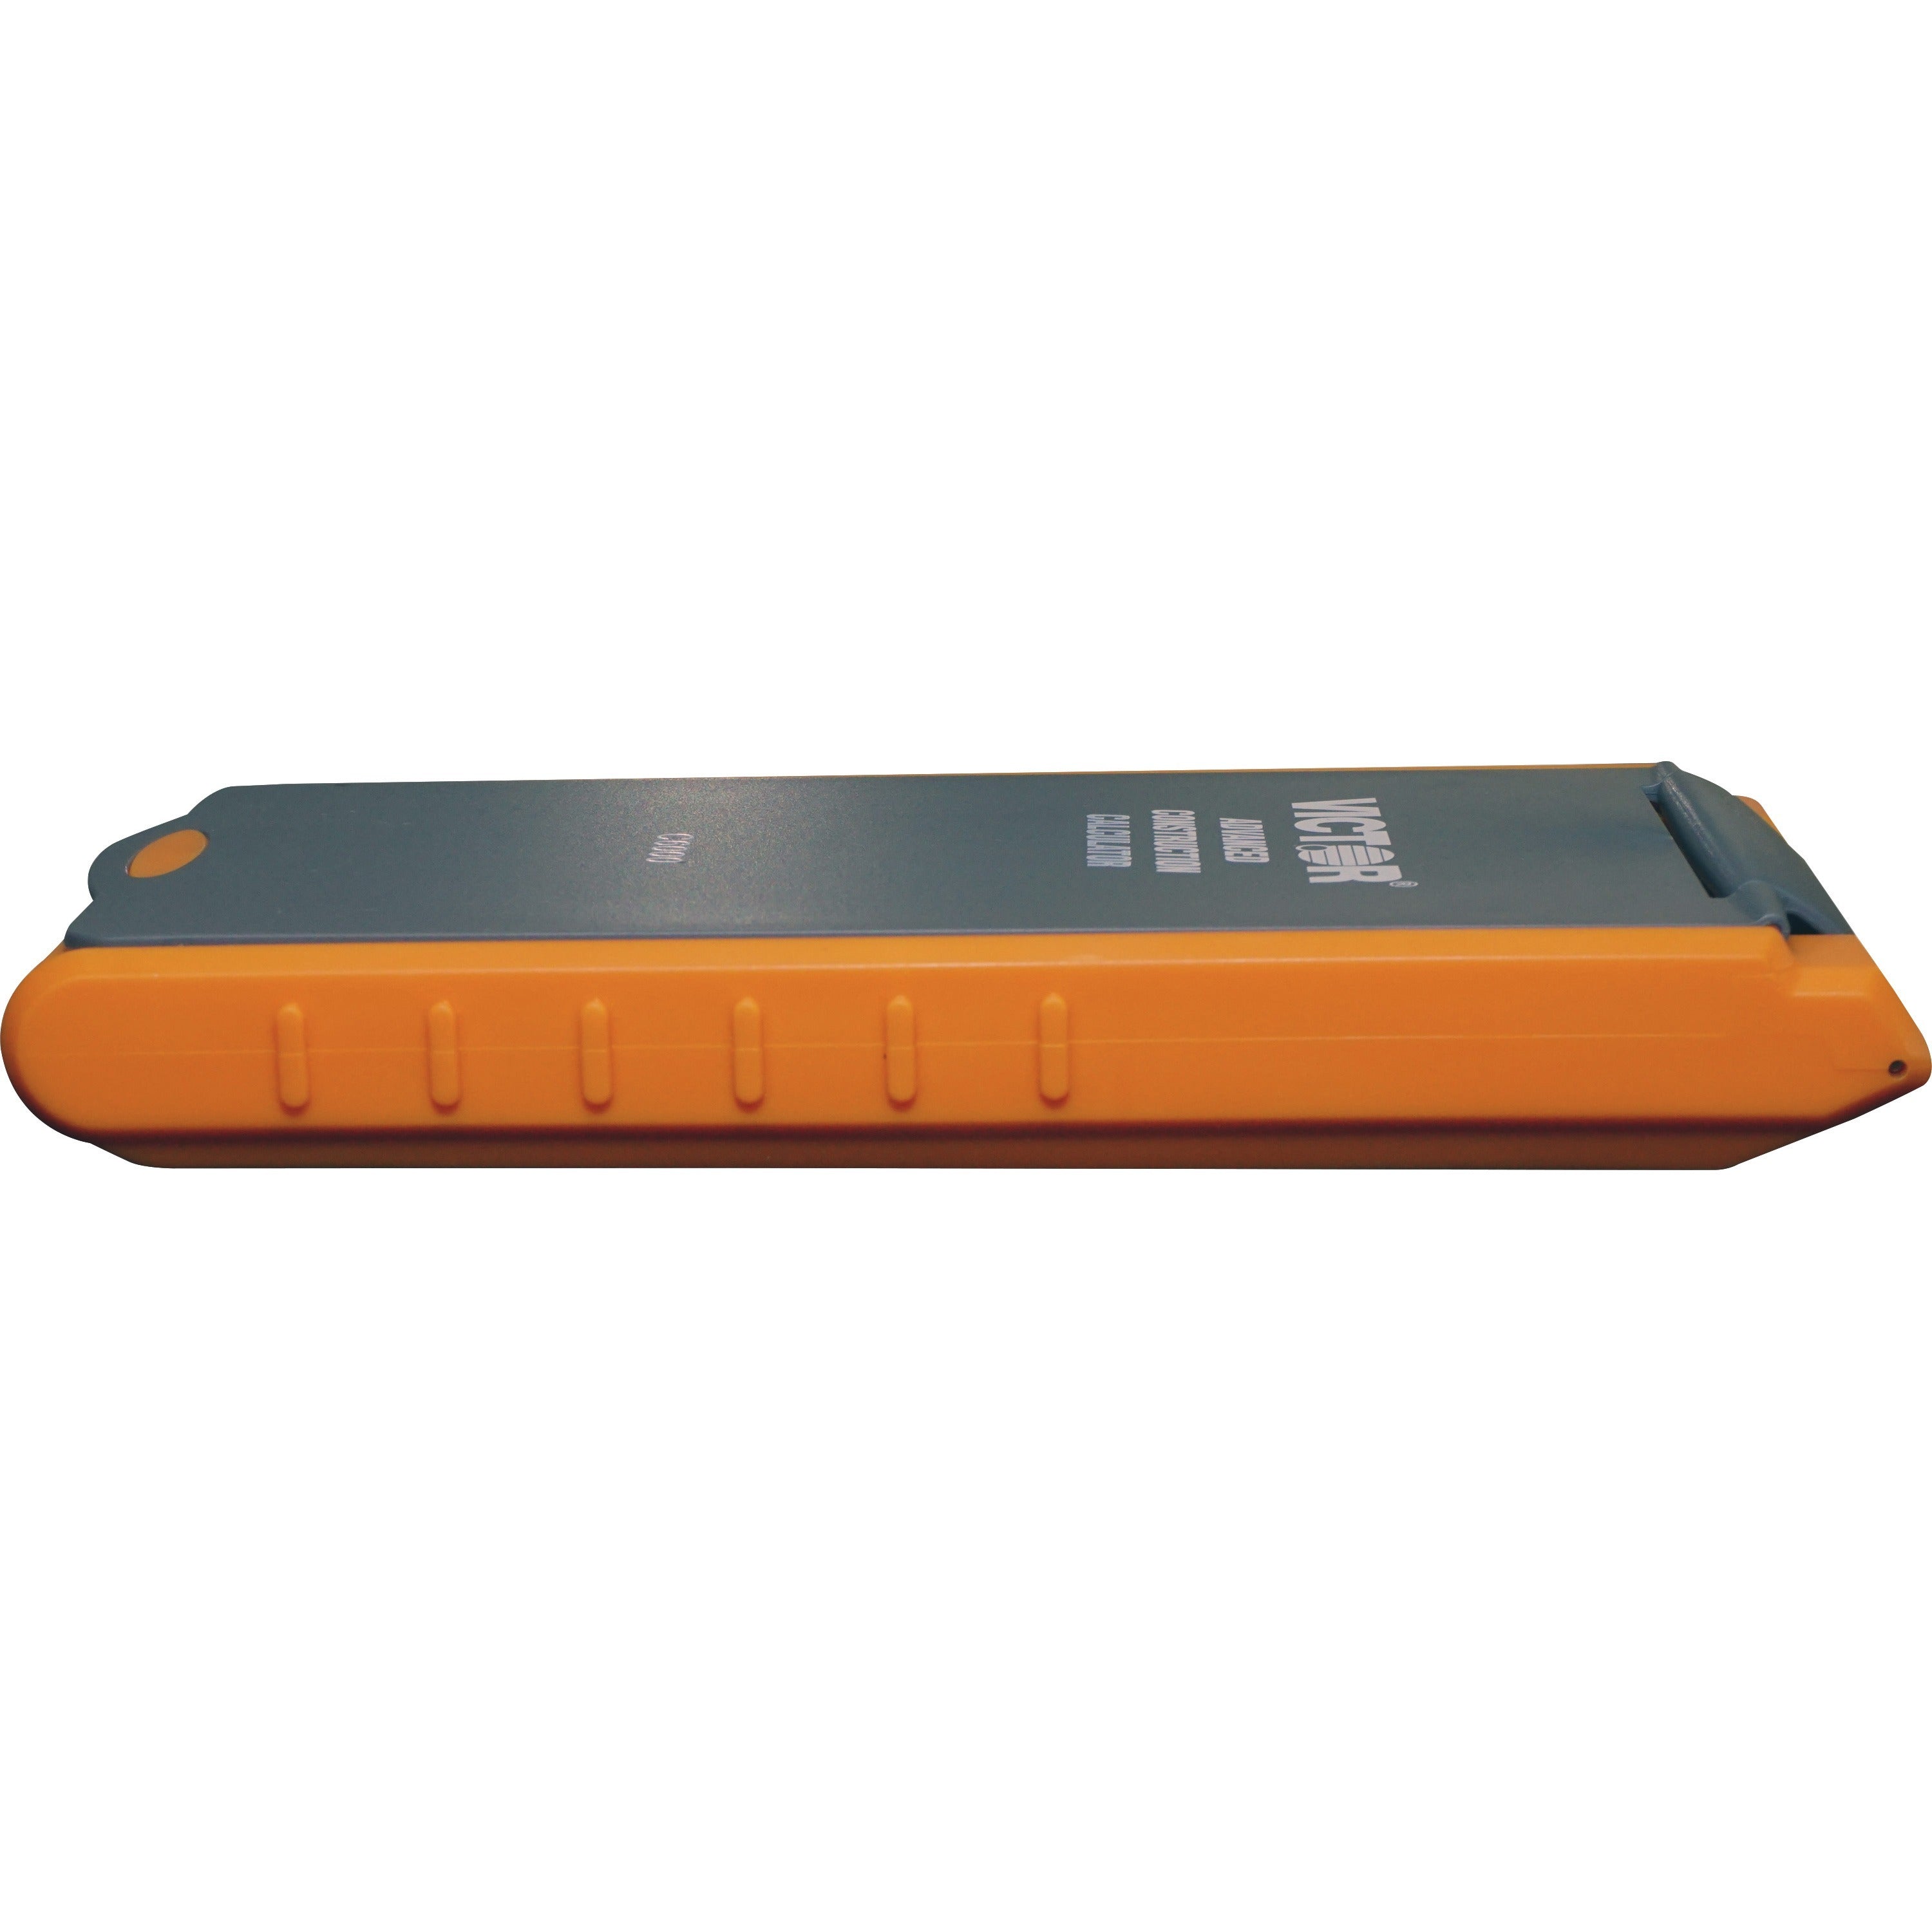 victor-c6000-advanced-construction-calculator-lcd-display-battery-powered-031-lcd-battery-powered-2-lr44-65-x-35-x-08-orange_vctc6000 - 3